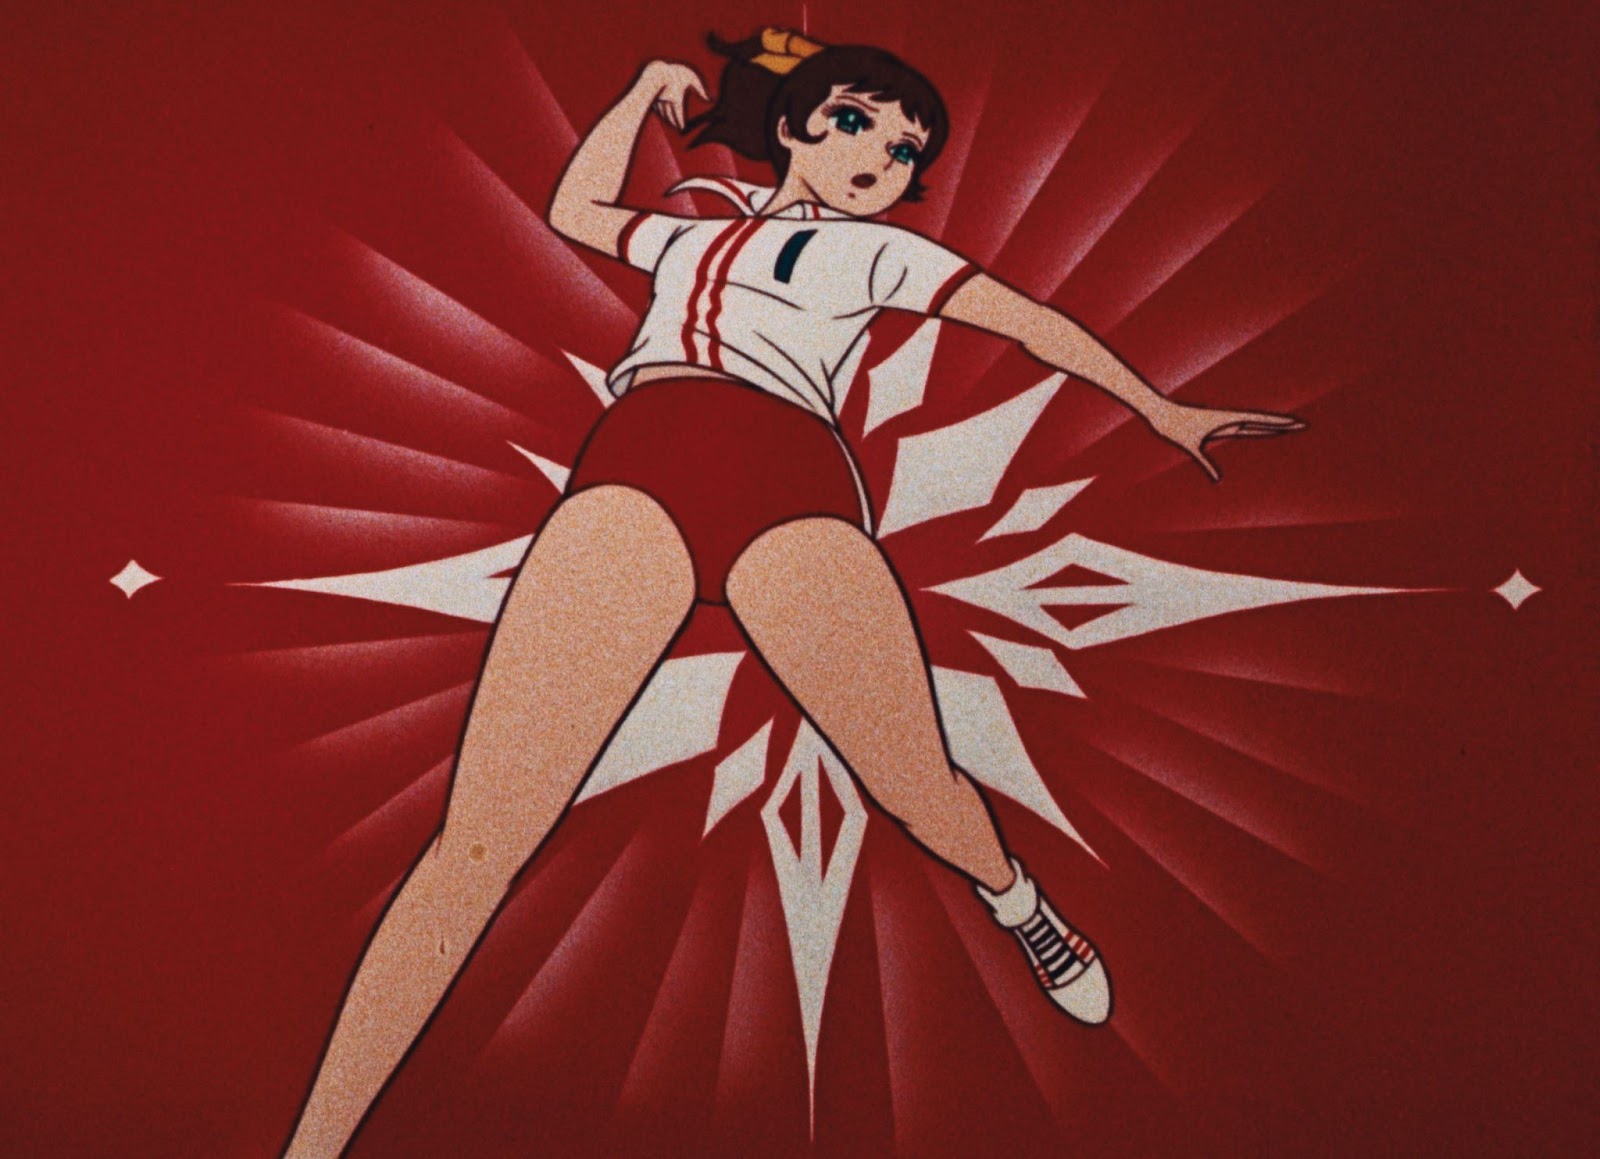 A screen still from The Witches of the Orient, featuring a scene from the original anime, depicting a female player jumping to spike a volleyball.